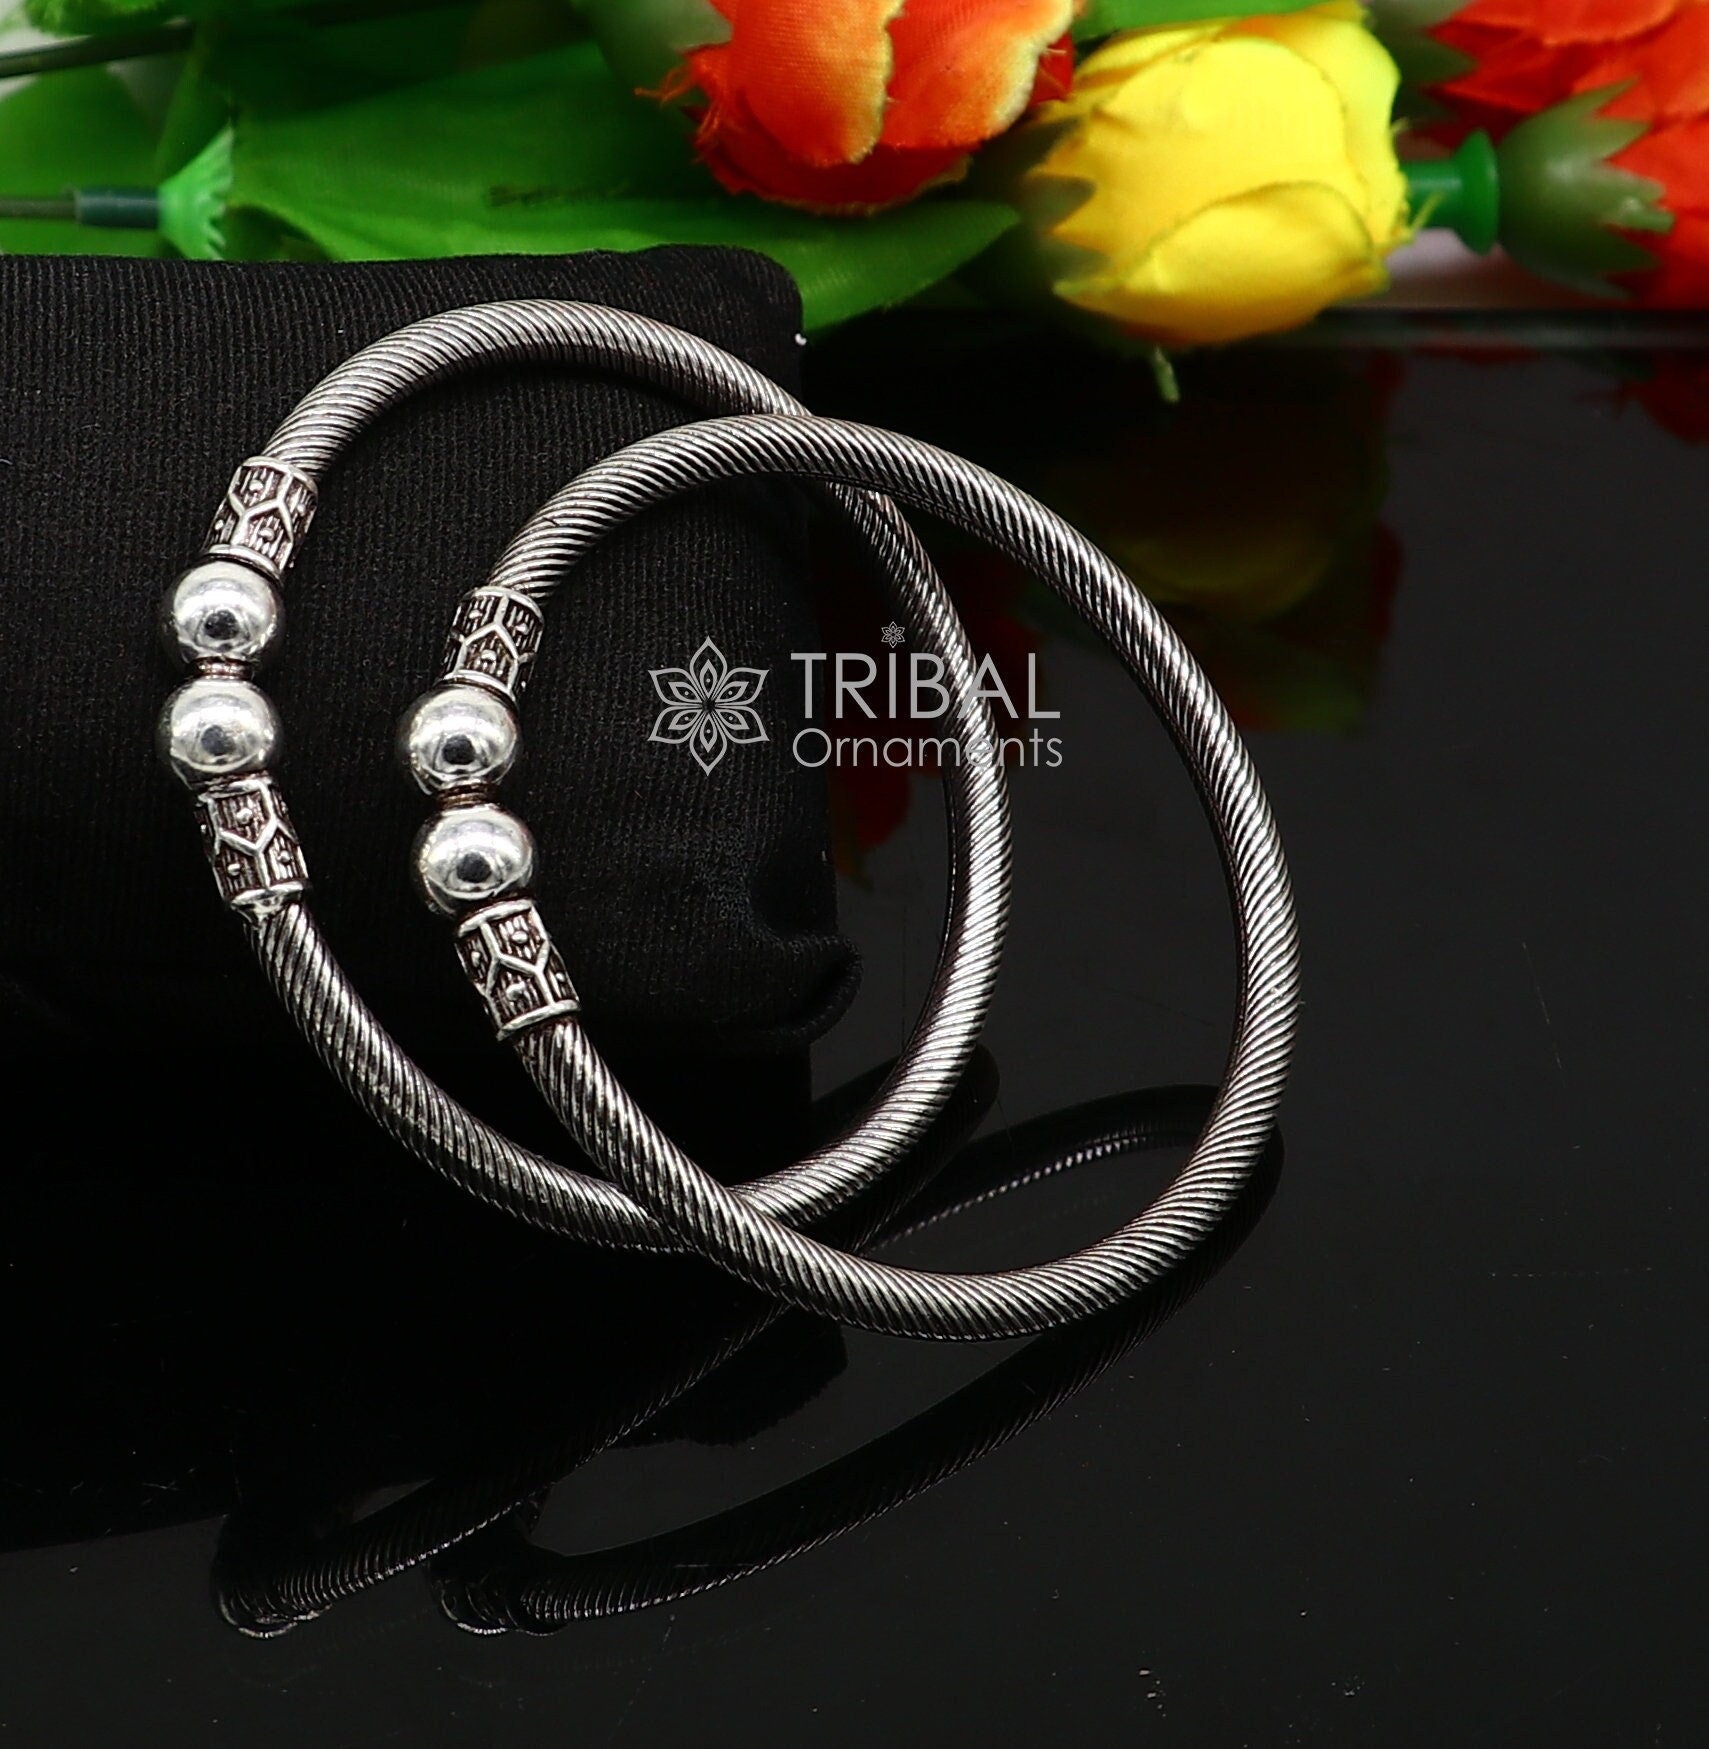 925 sterling silver handmade unique cultural design trendy kada bracelet for men's and girl's, best delicate Light weight jewelry nsk667 - TRIBAL ORNAMENTS